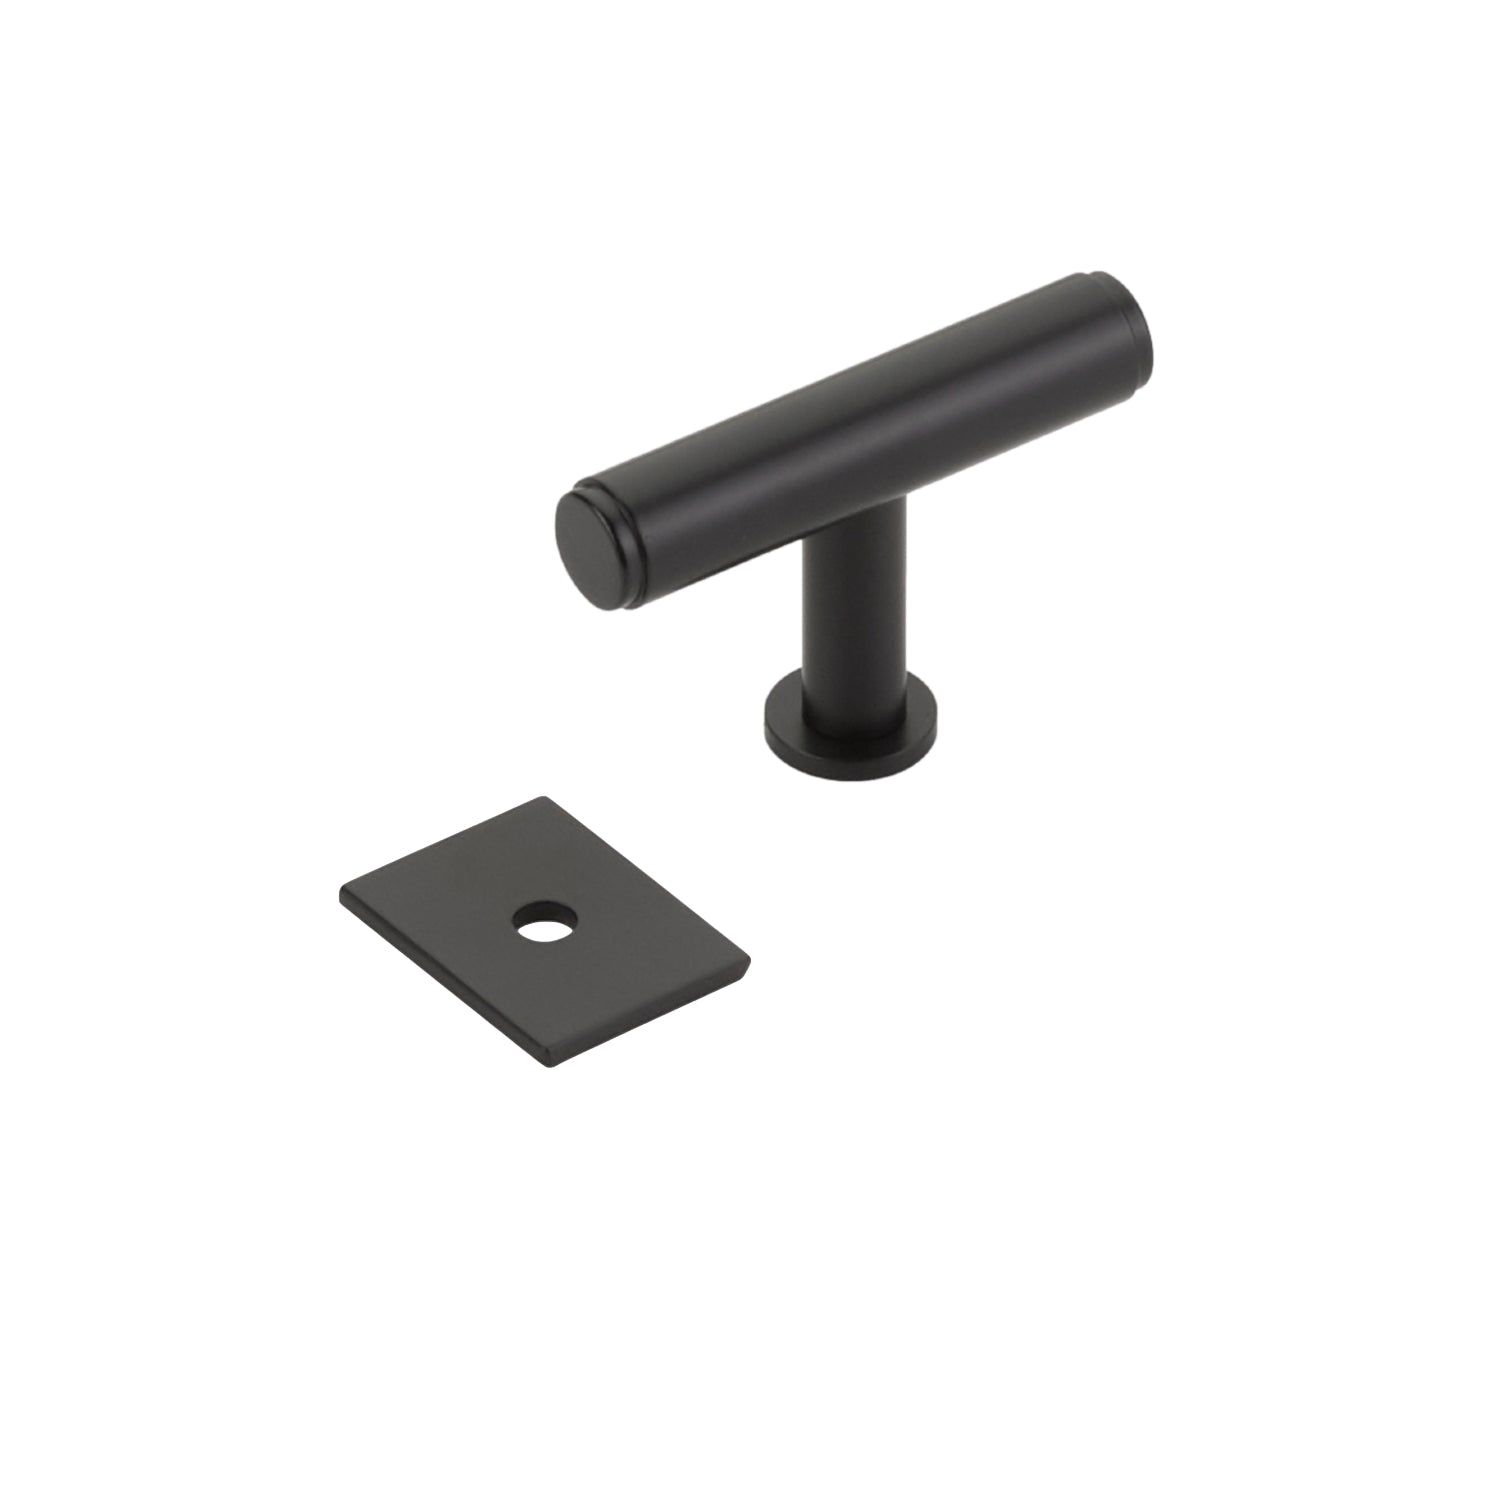 Matte Black "Maison No. 2" Smooth Drawer Pulls and Cabinet Knobs with Optional Backplate - Forge Hardware Studio